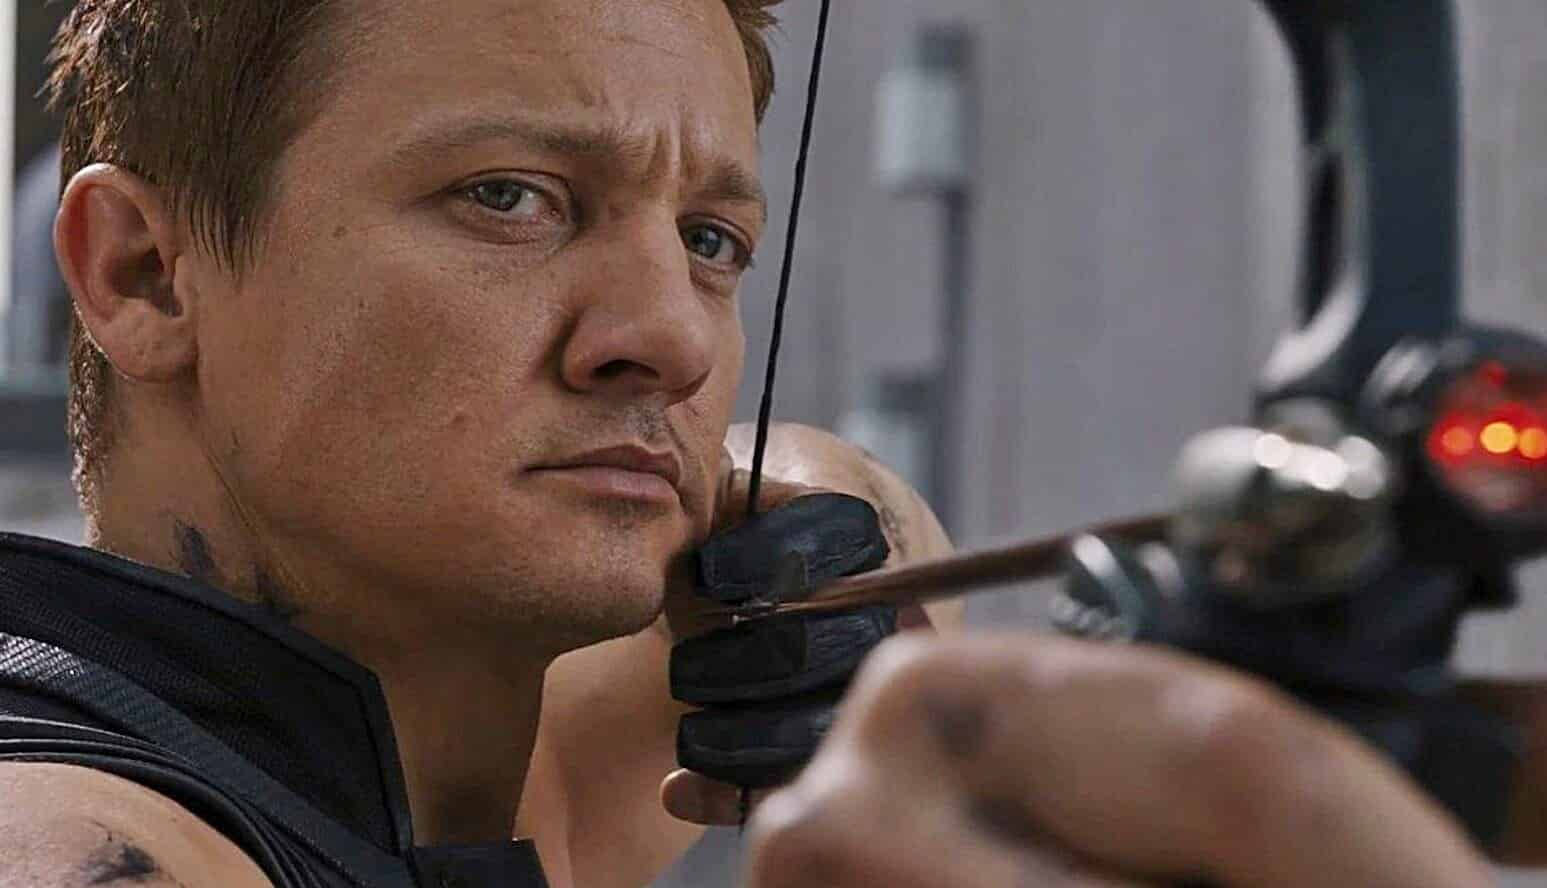 Jeremy Renner Aiming With A Bow Background